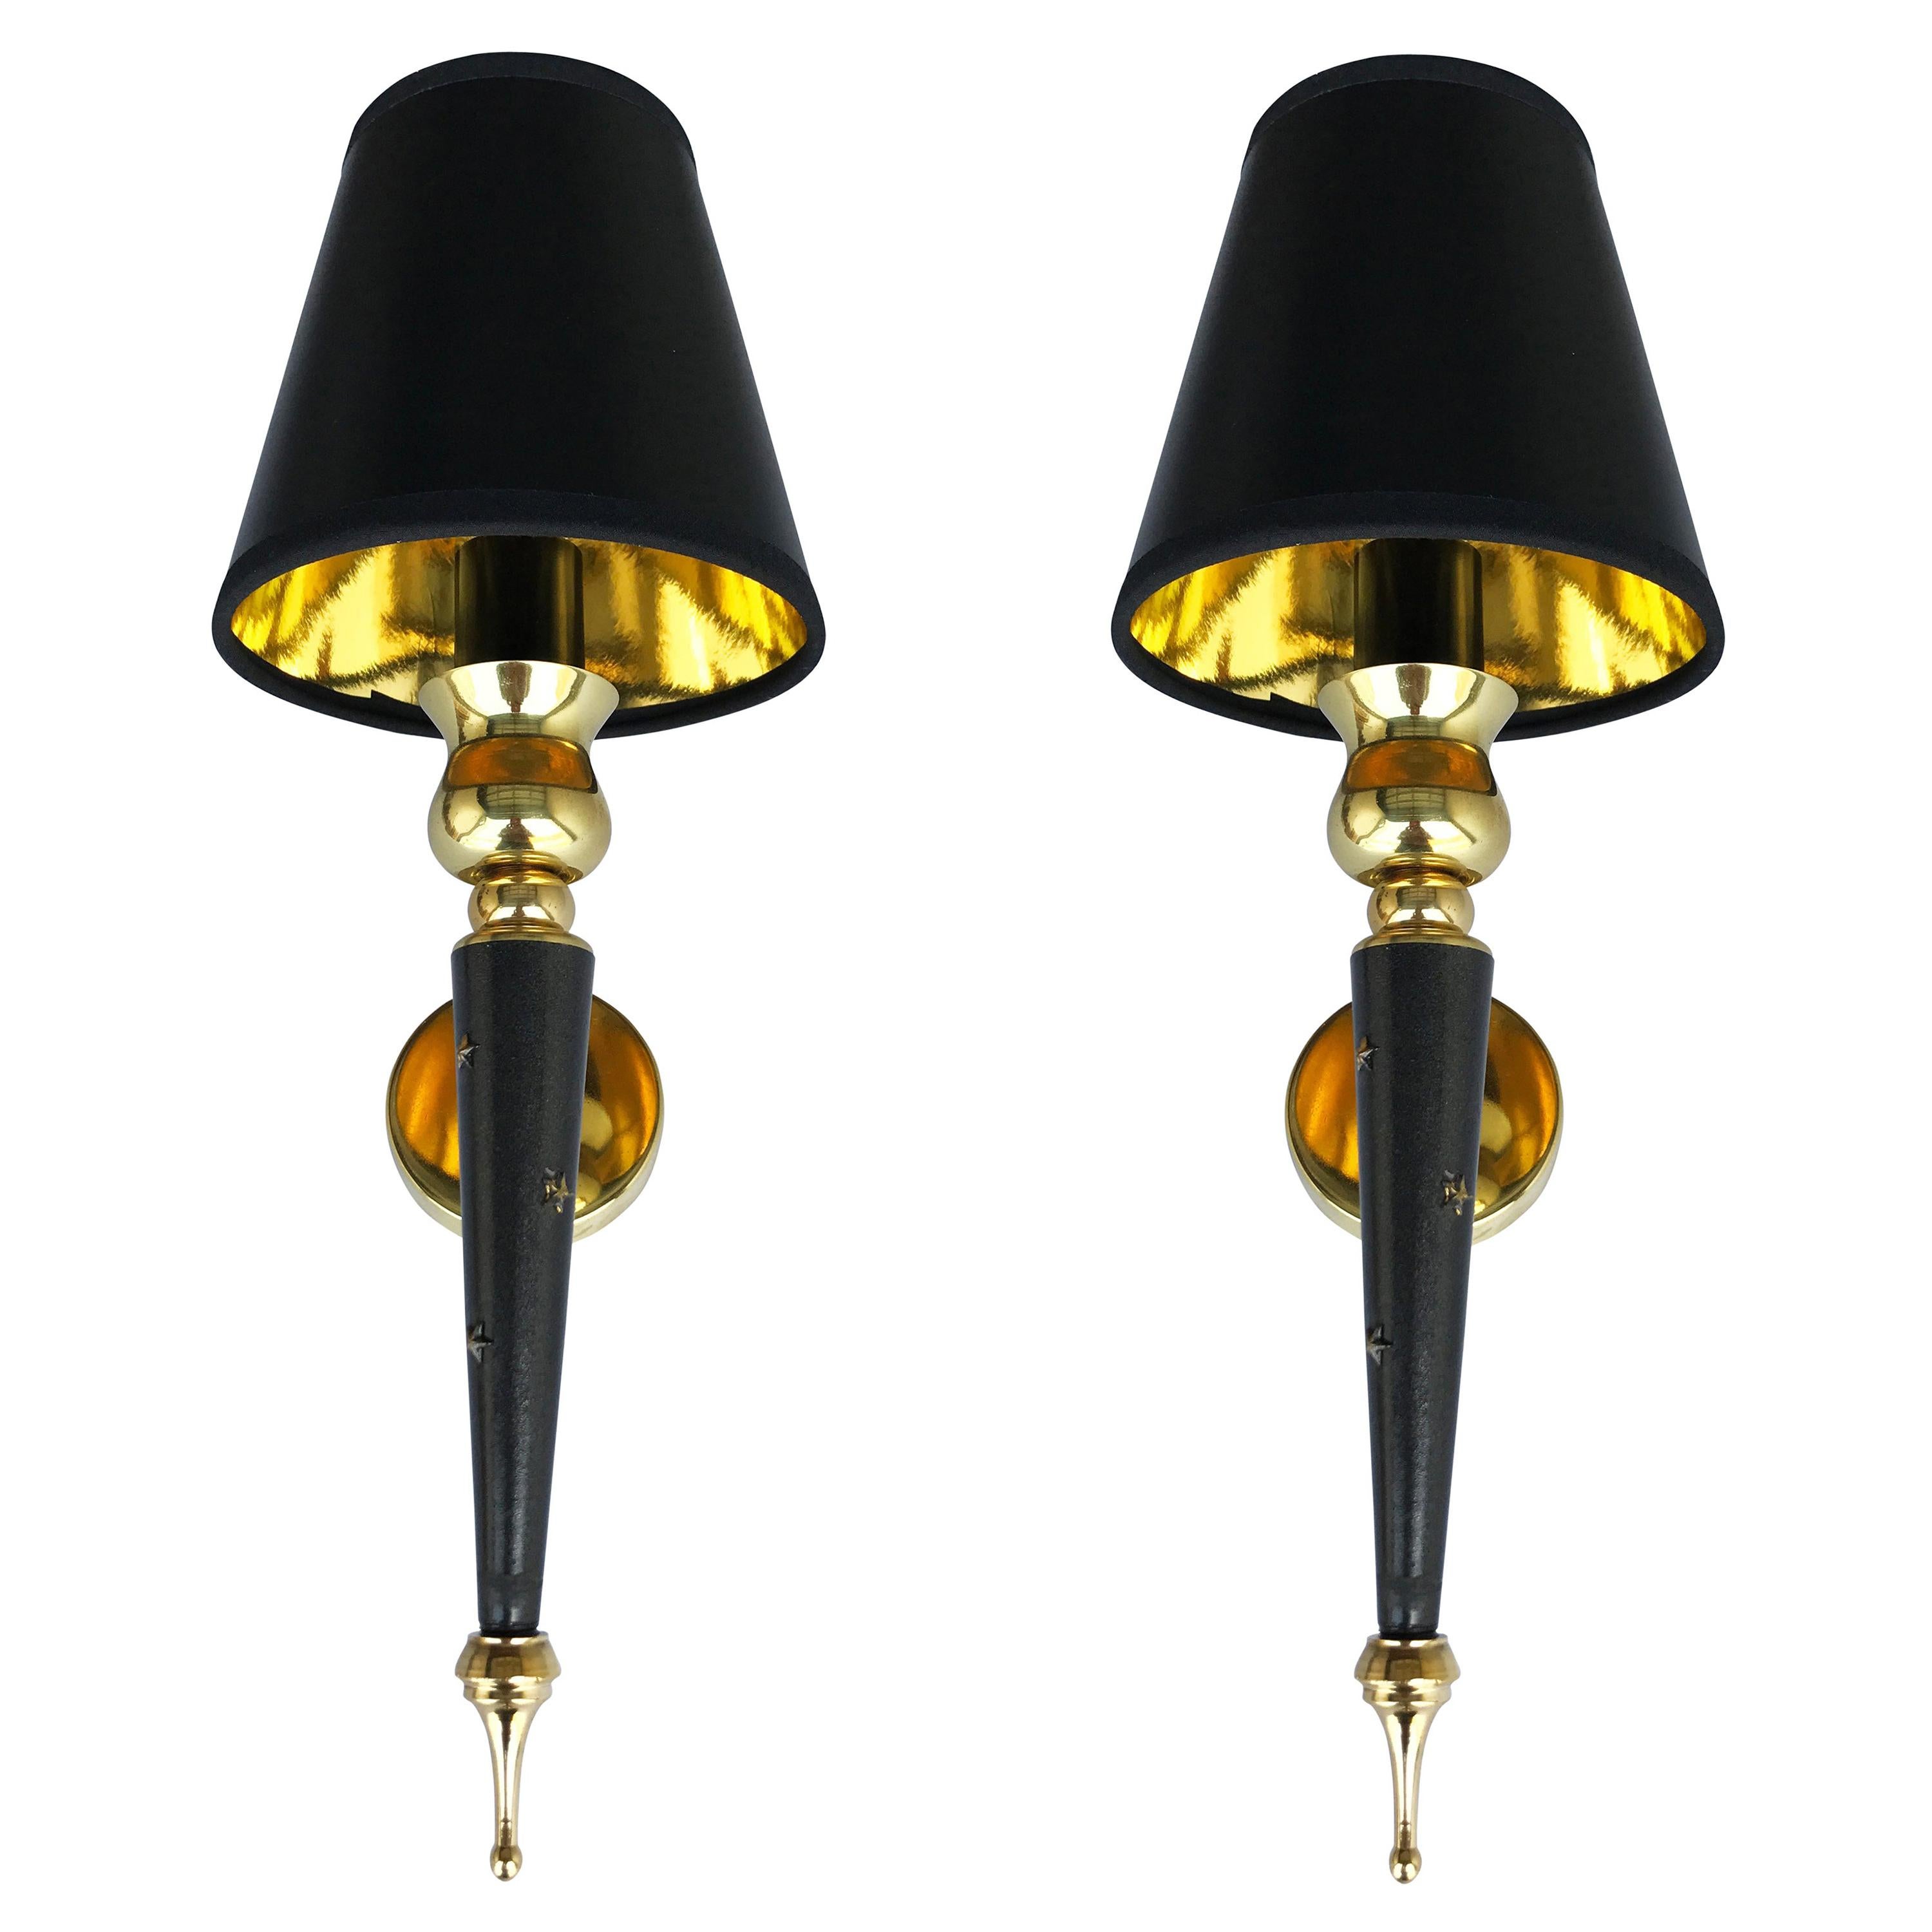 Pair of Jacques Adnet Style Sconces